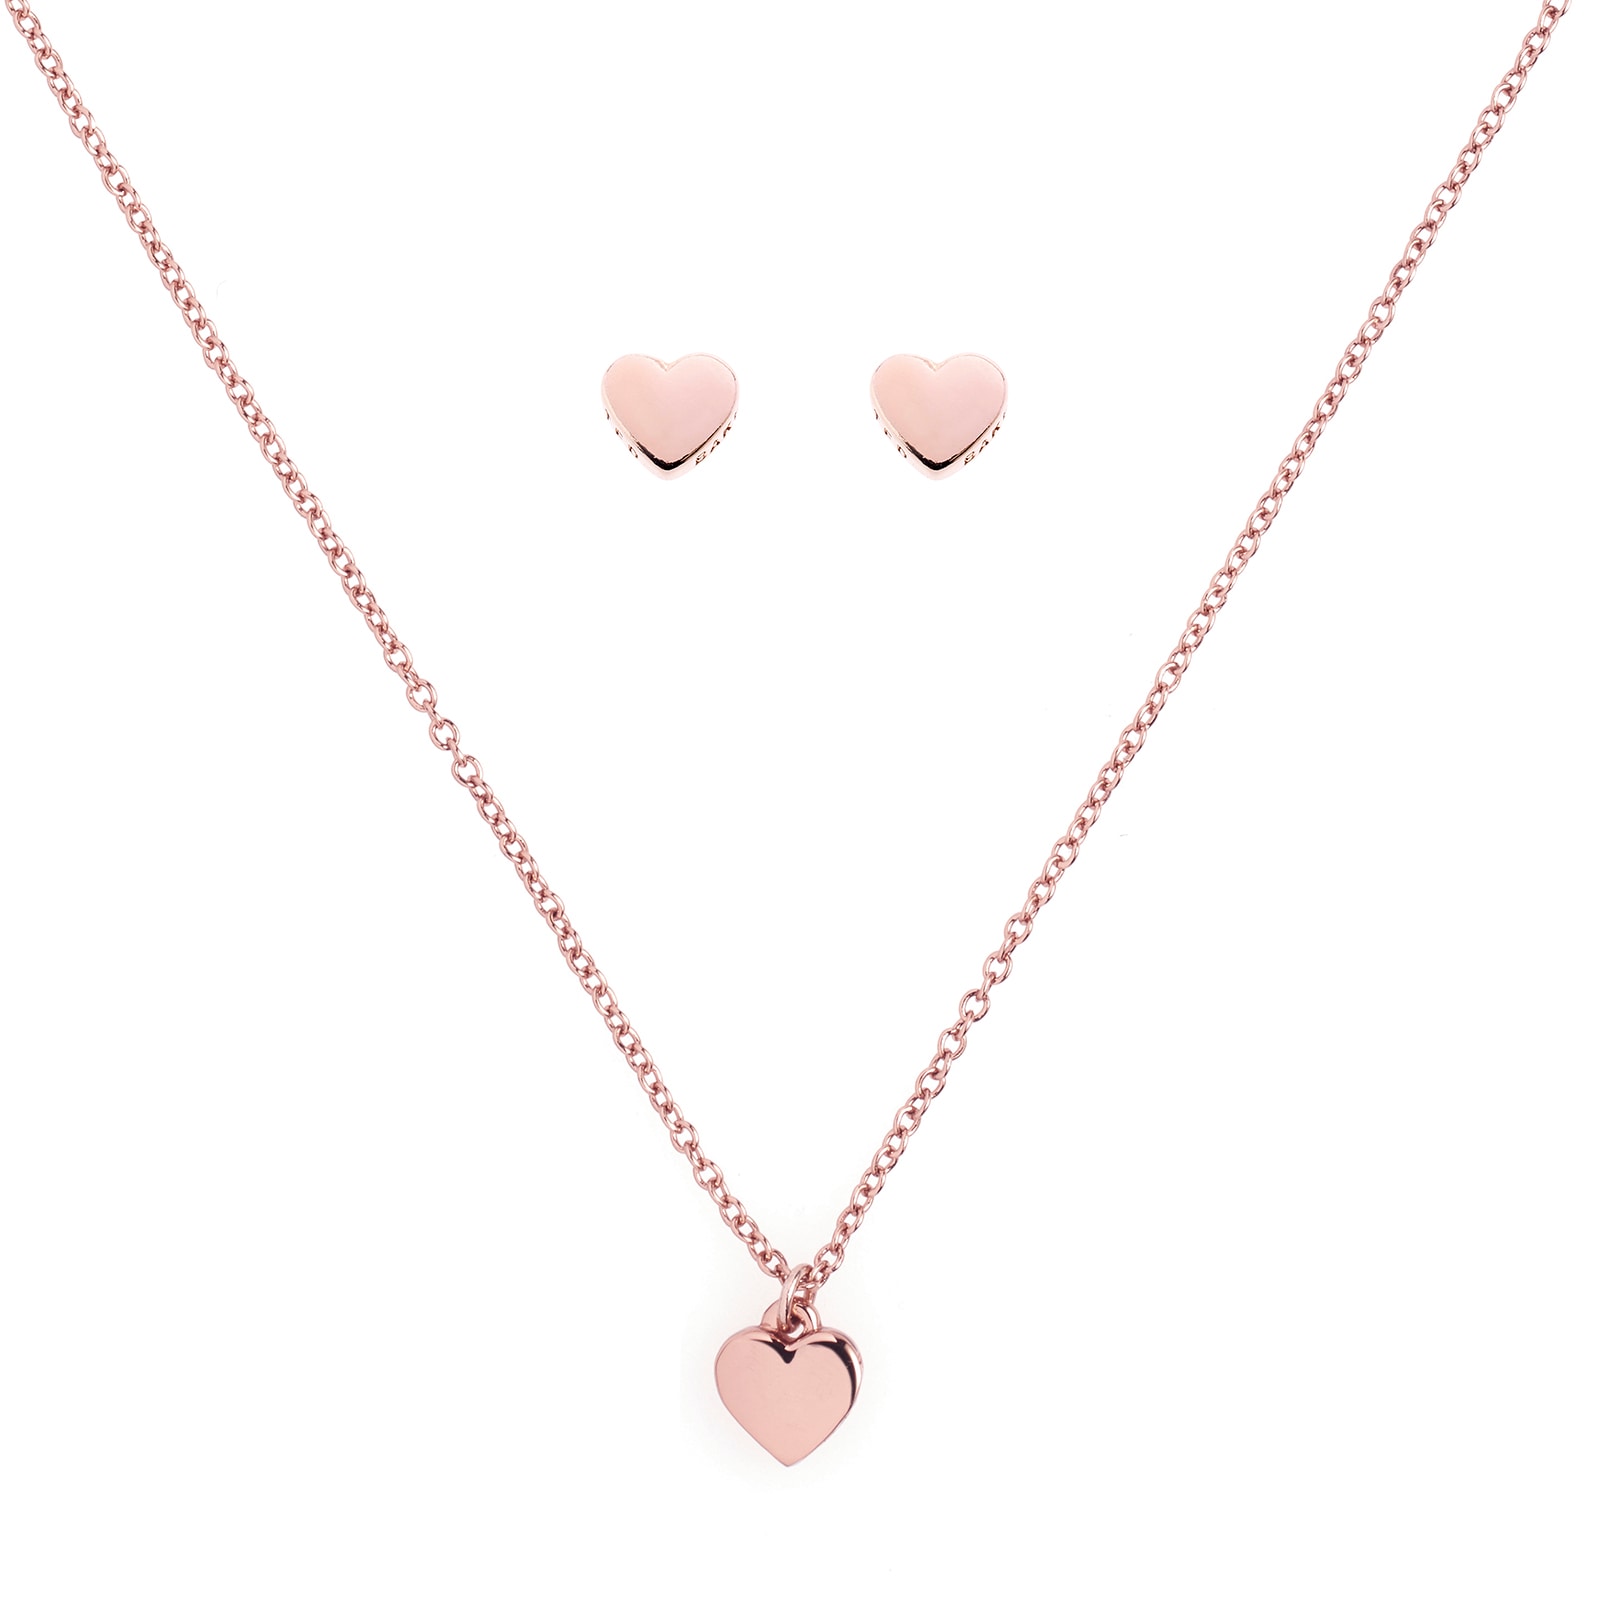 TED BAKER HARA HEART PENDANT NECKLACE – Yeltuor